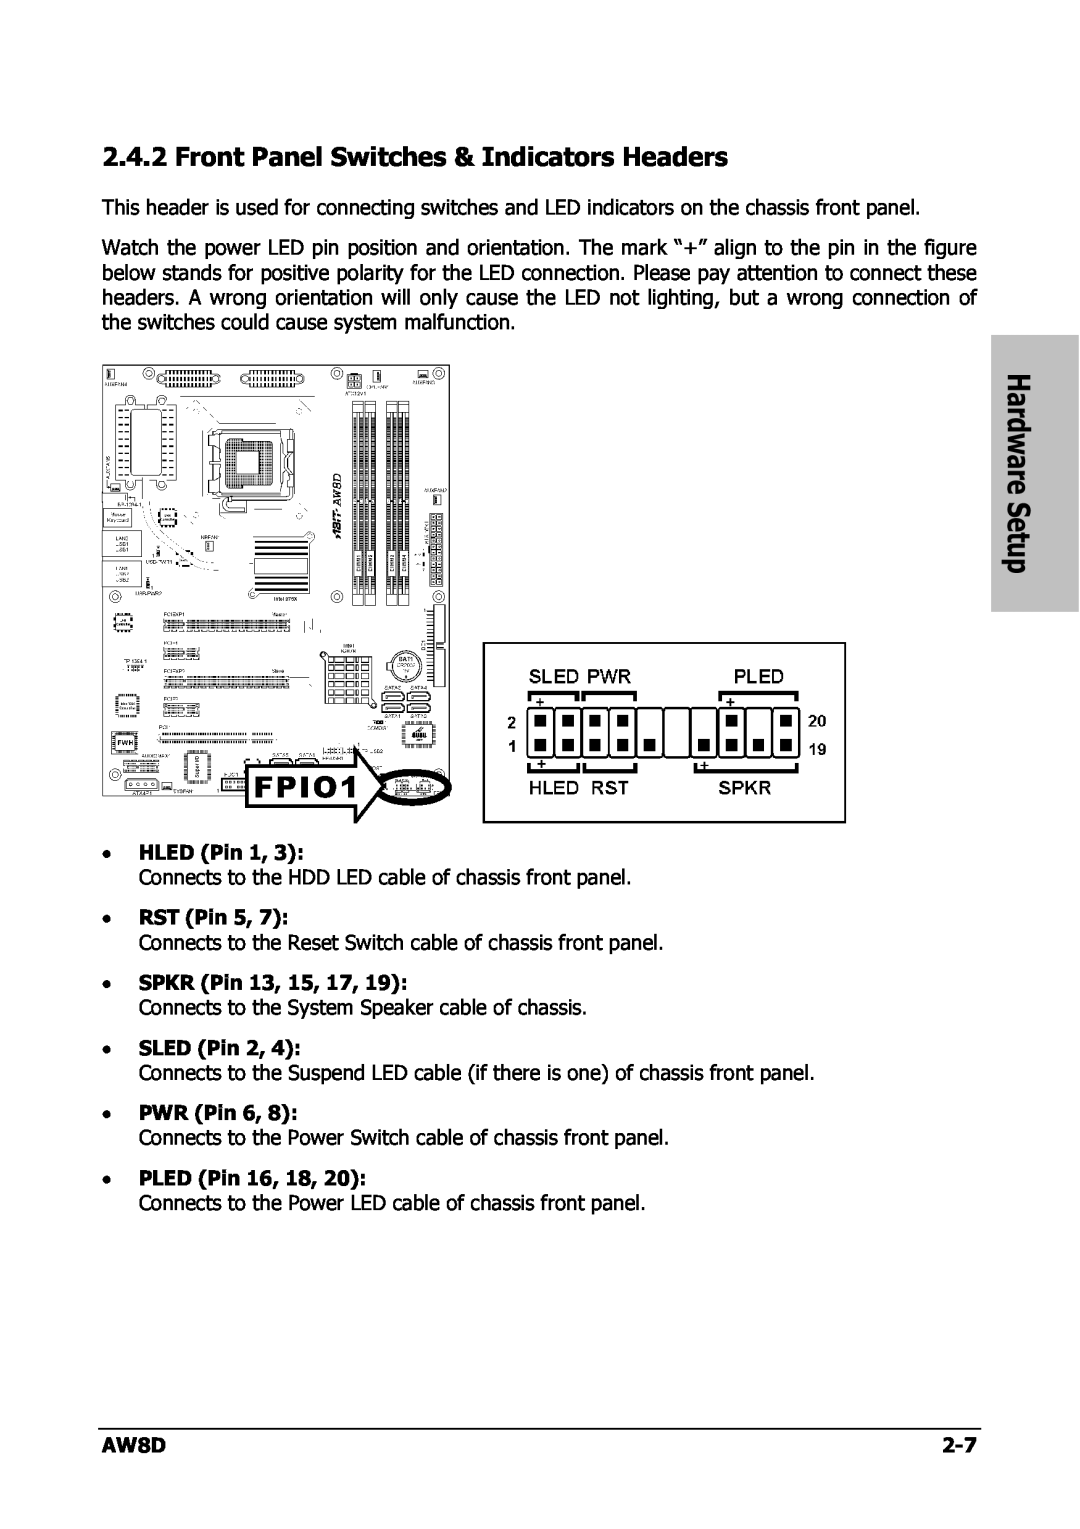 Intel AW8D user manual Front Panel Switches & Indicators Headers, Hardware Setup 